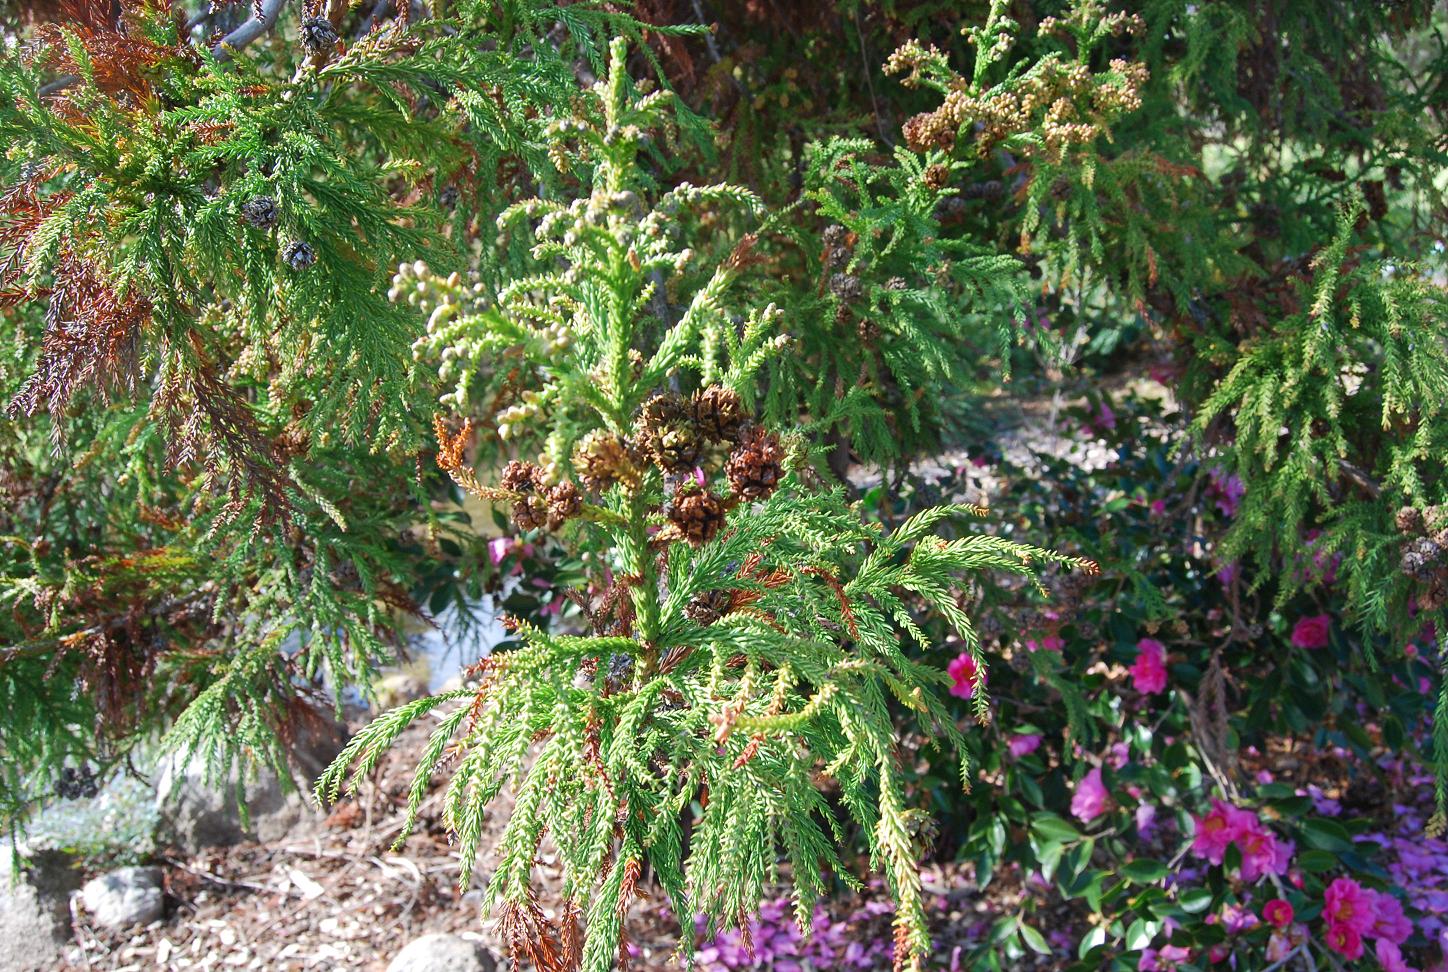 pine and other trees in bloom next to a path